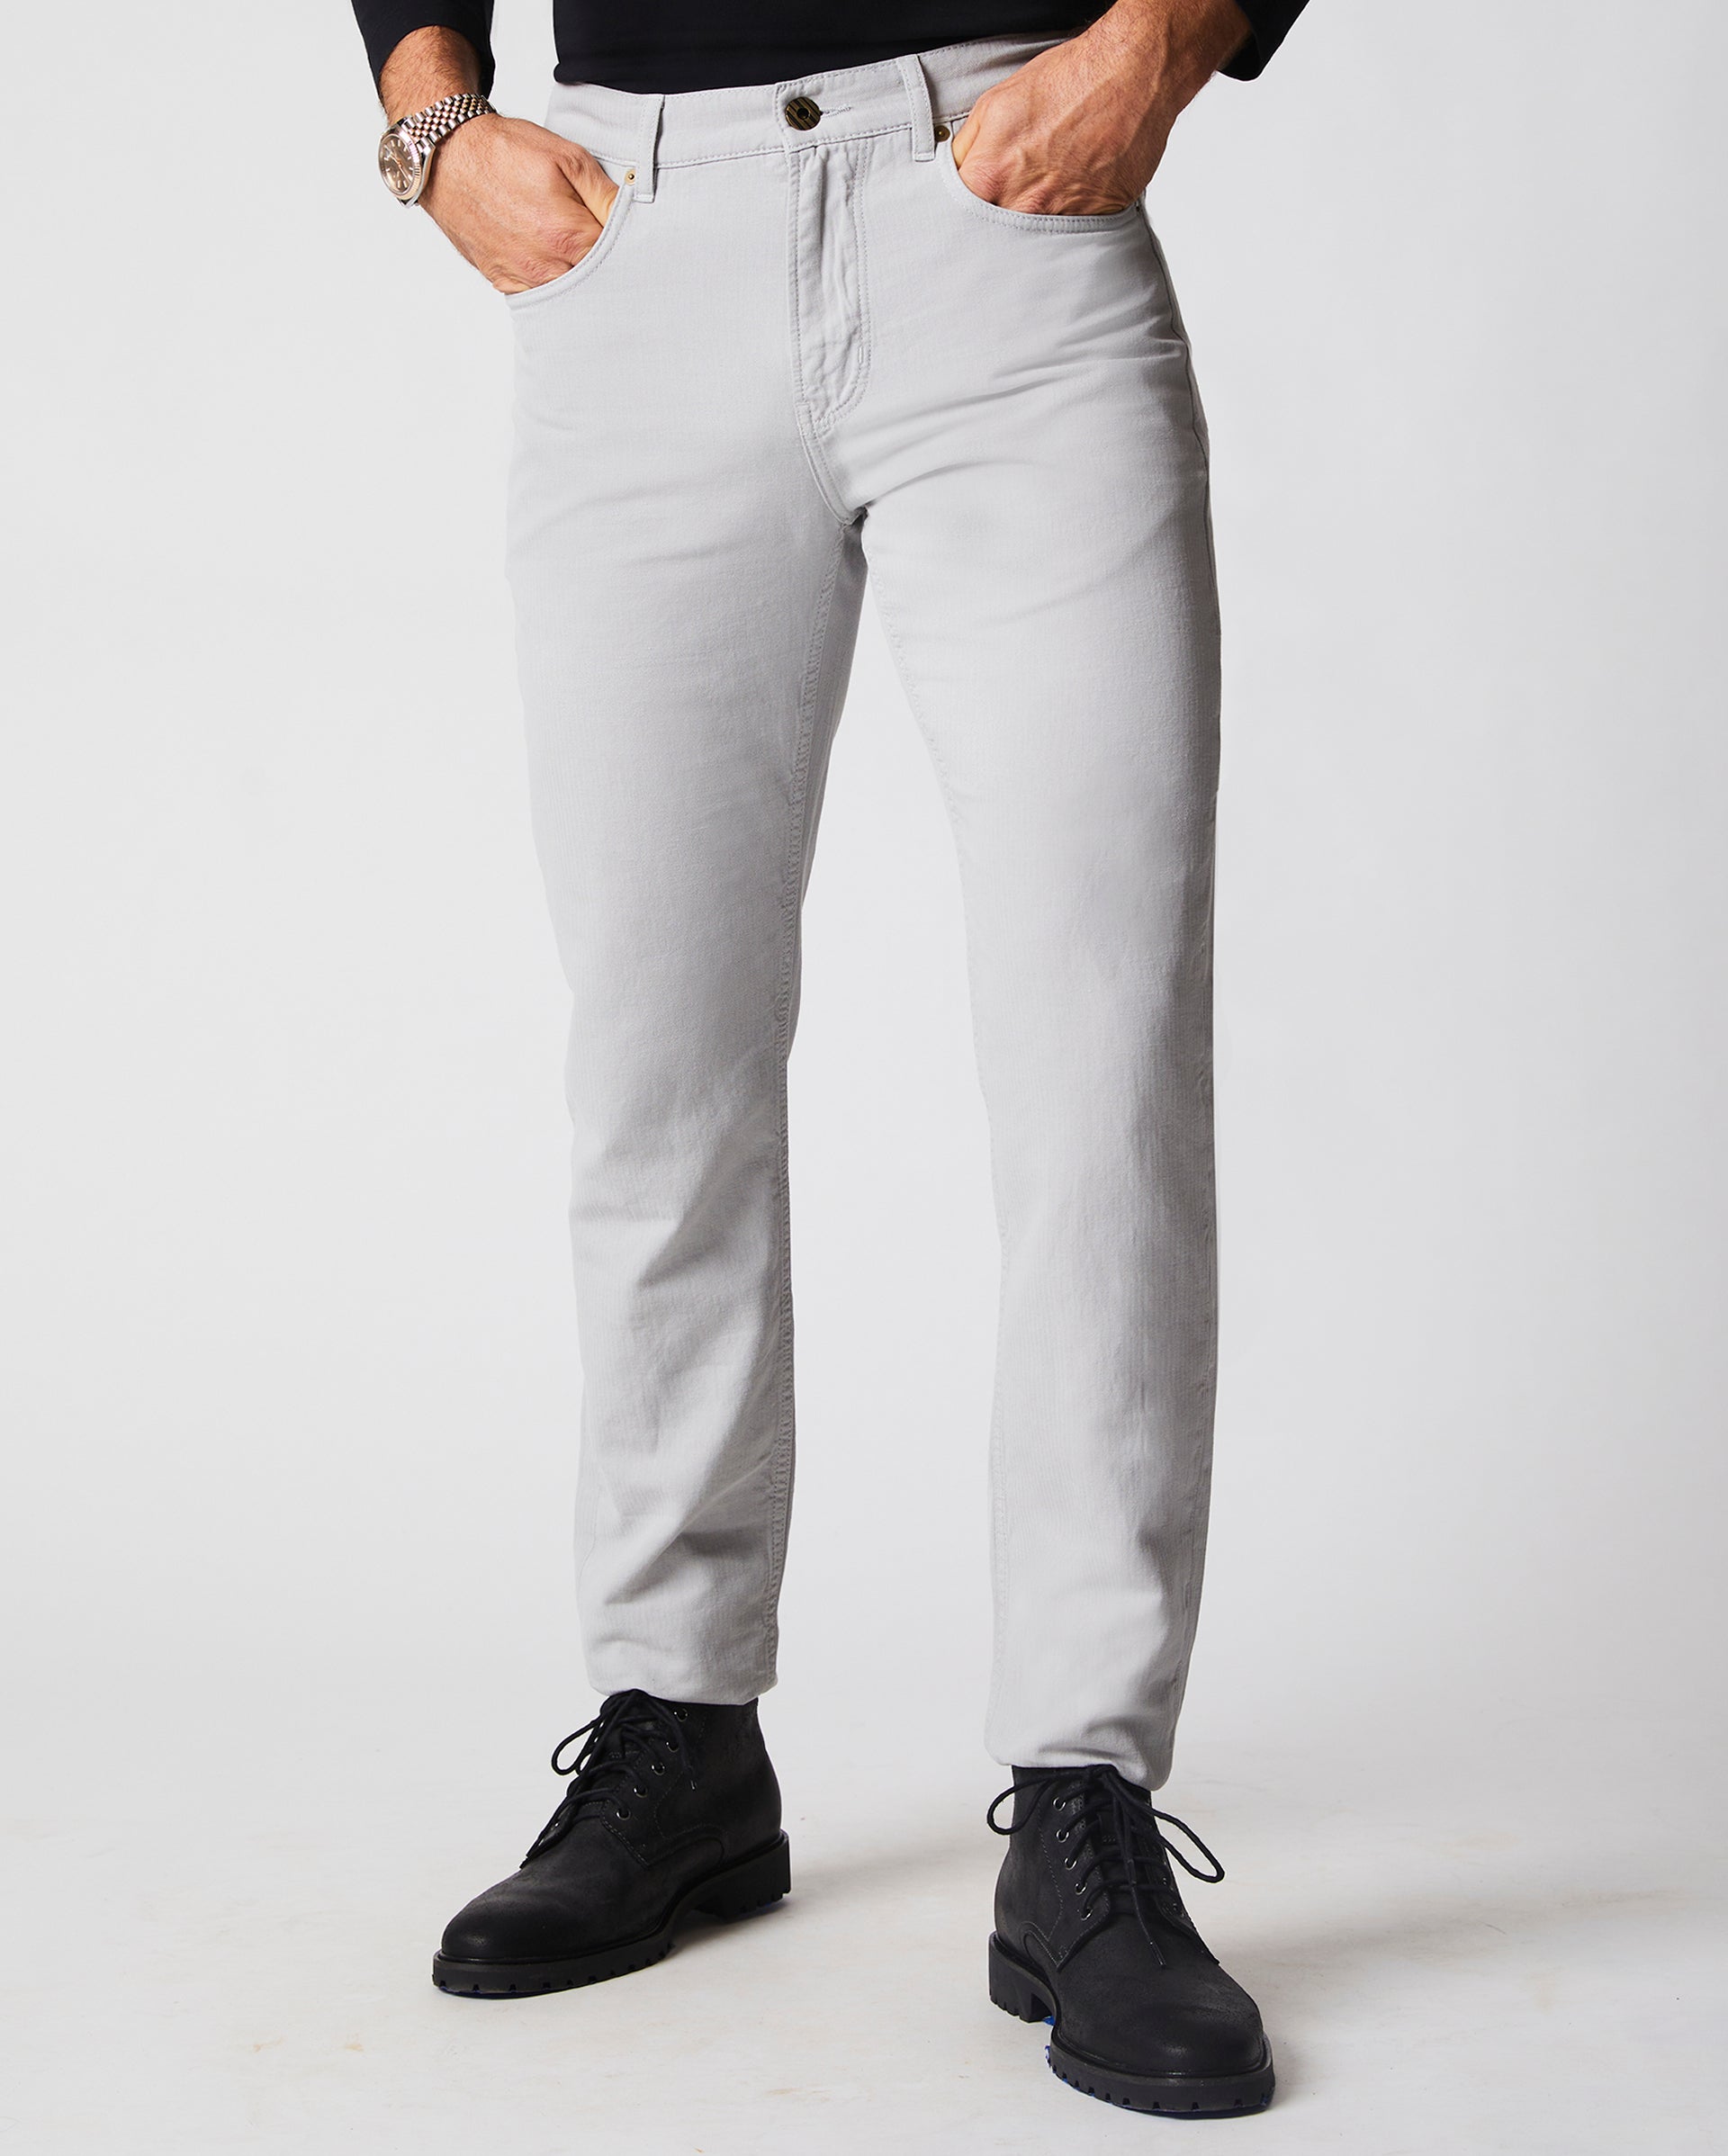 Men's Twill Tailored Pants | Happy Chef